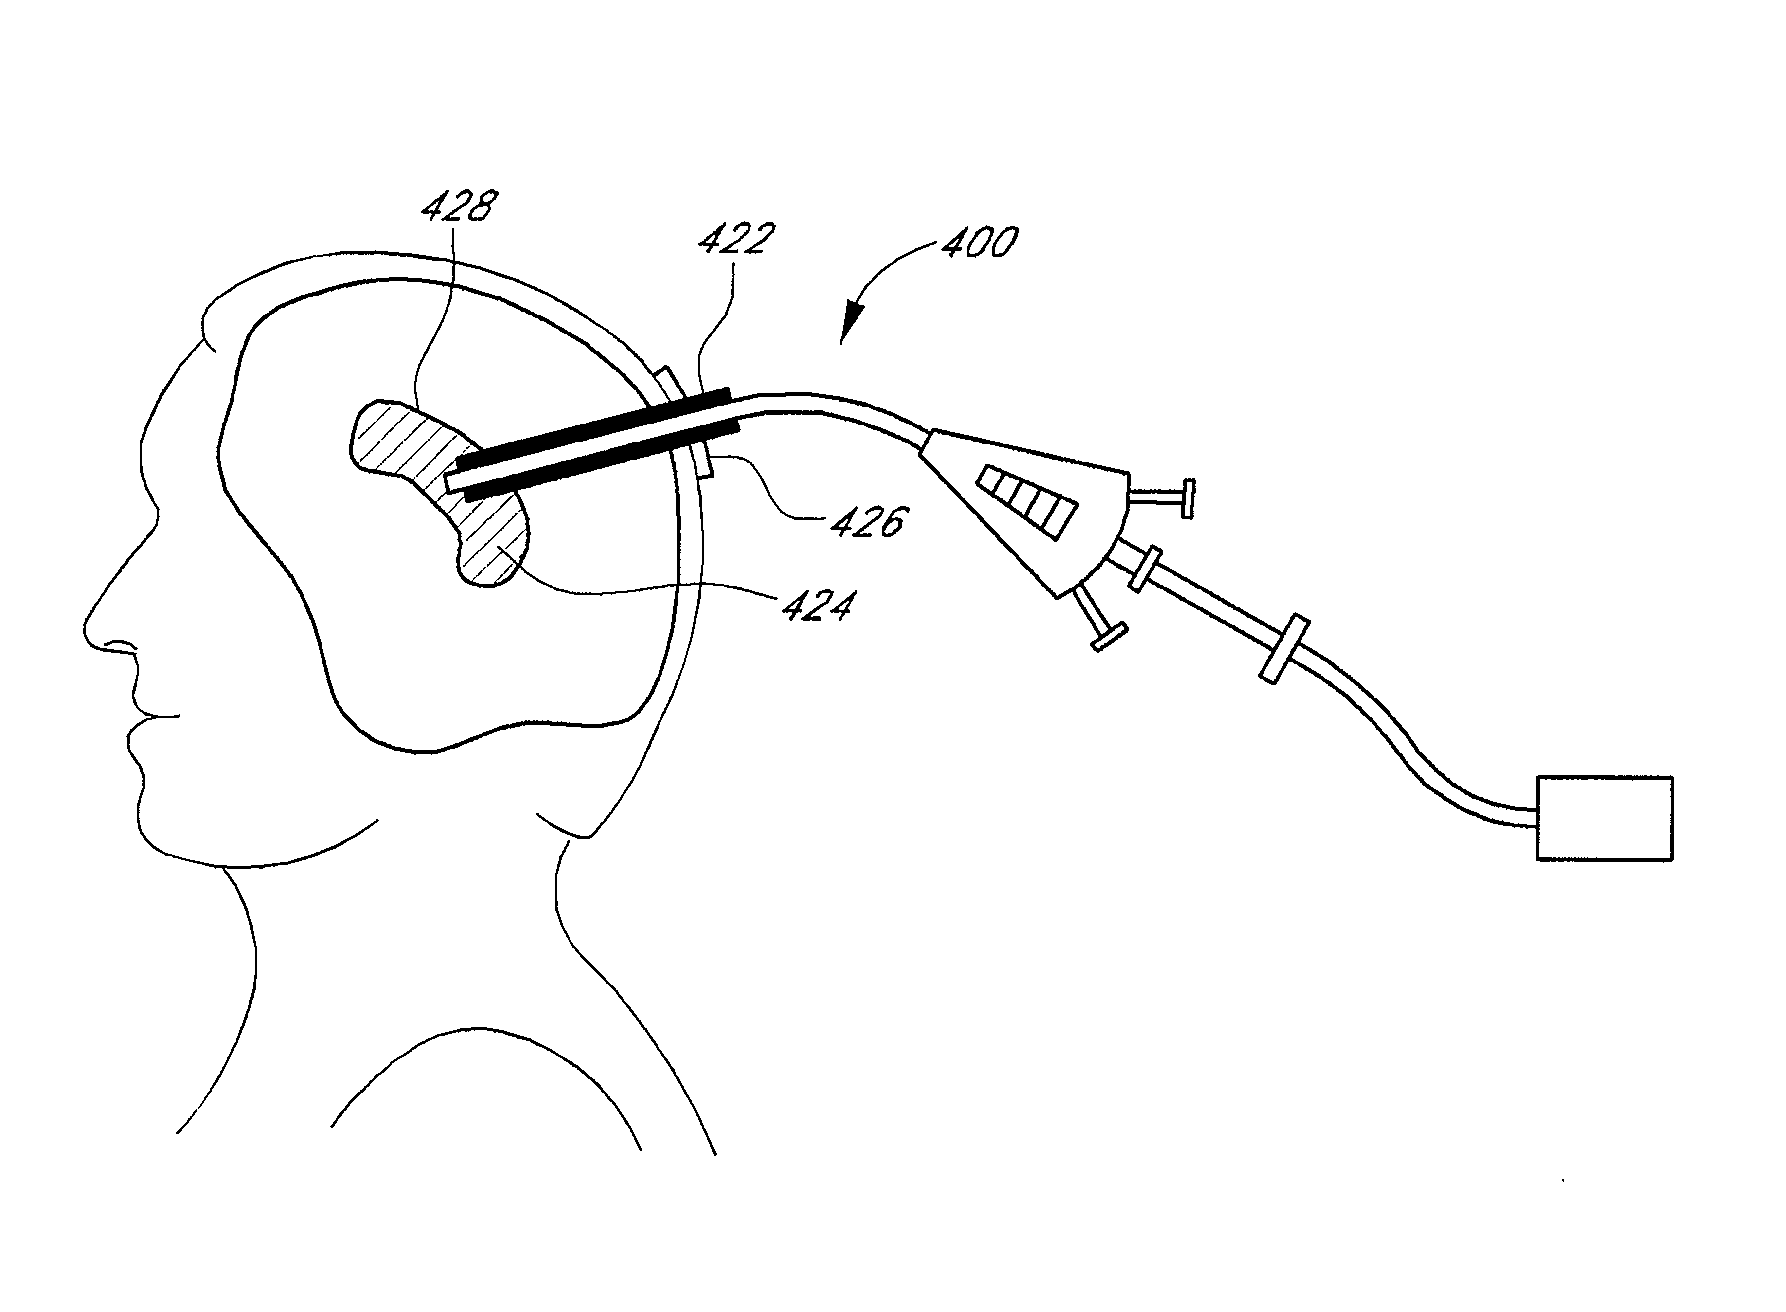 Method and apparatus for treatment of intracranial hemorrhages